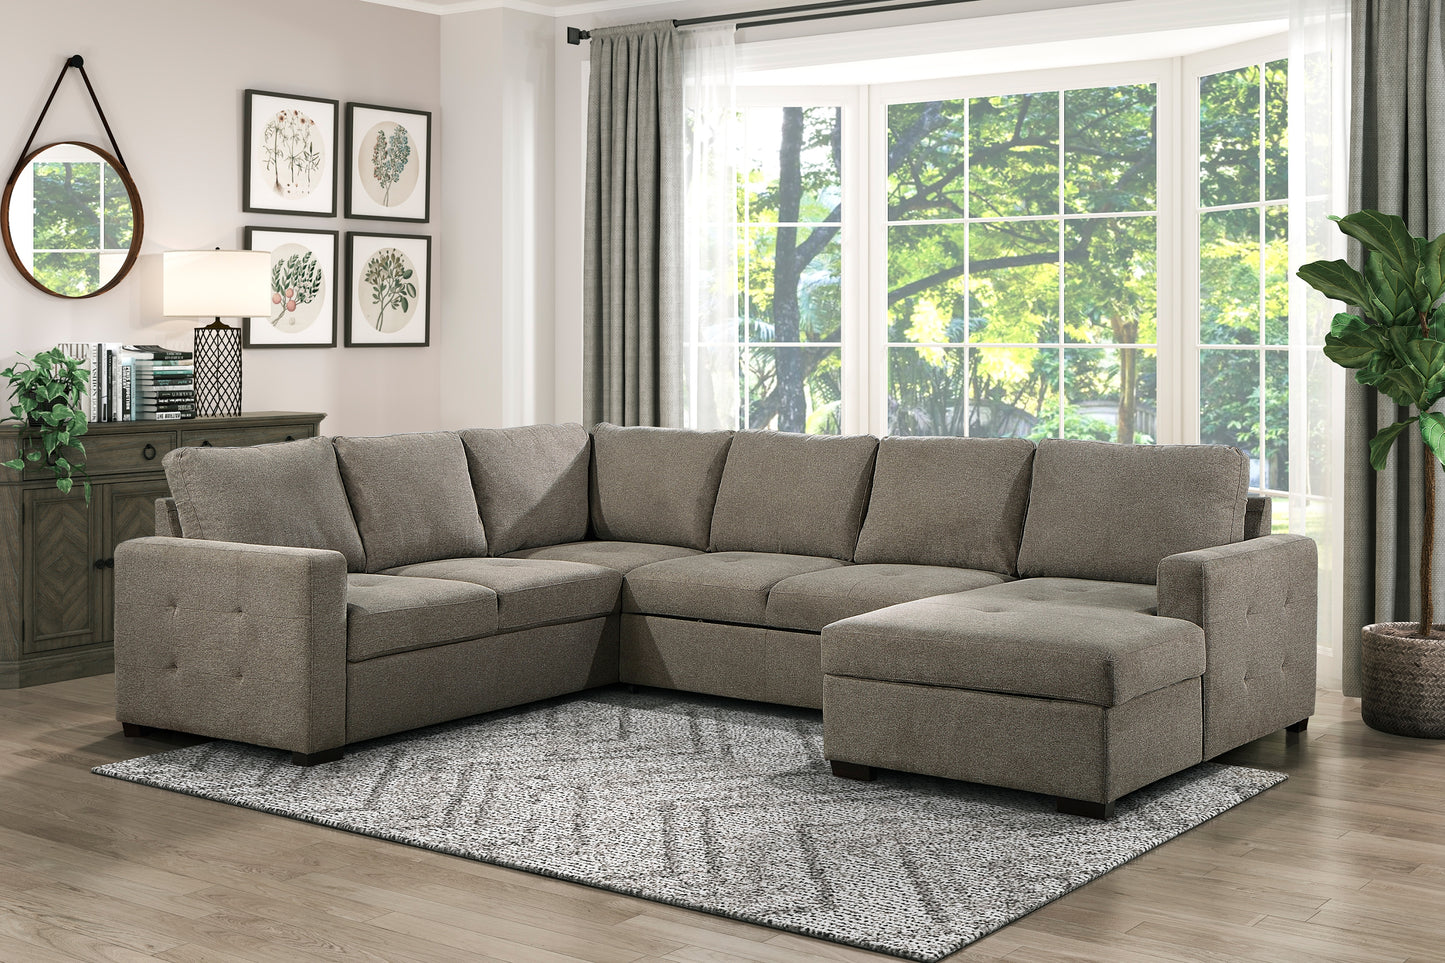 Elton 3PCS LAF or RAF Sectional with Sleeper & Storage BROWN ONLY